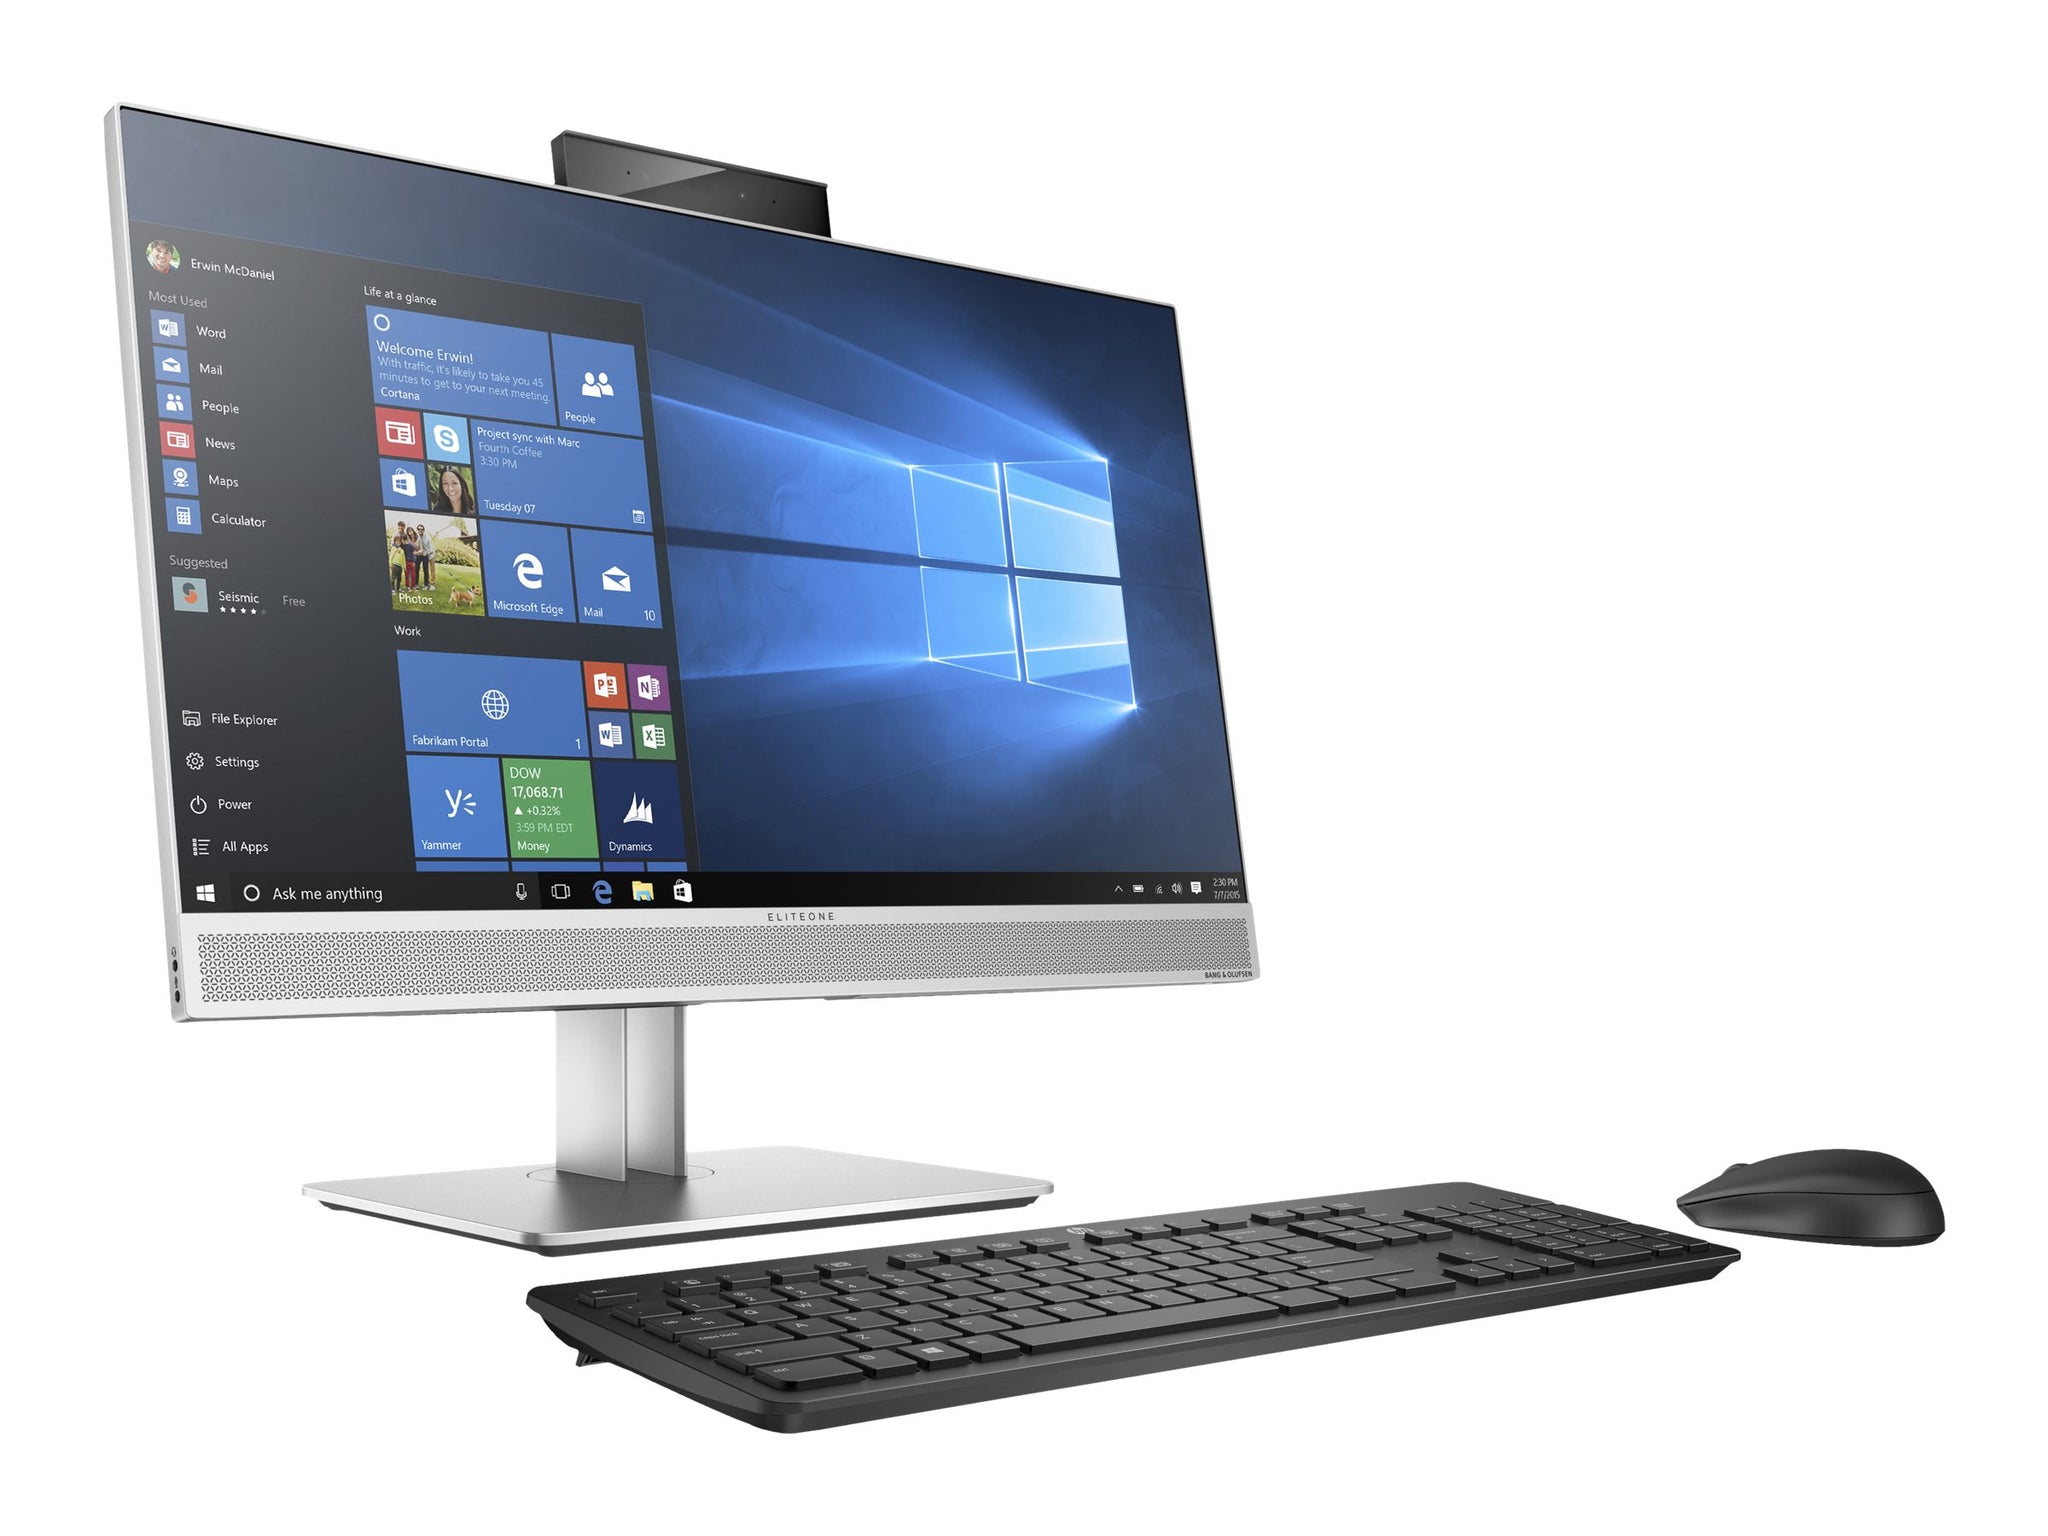 HP EliteDesk 800 G4 23.8-inch NonTouch All-in-One PC - I5-8500 8GB 256GB M.2 W10P Refurbished